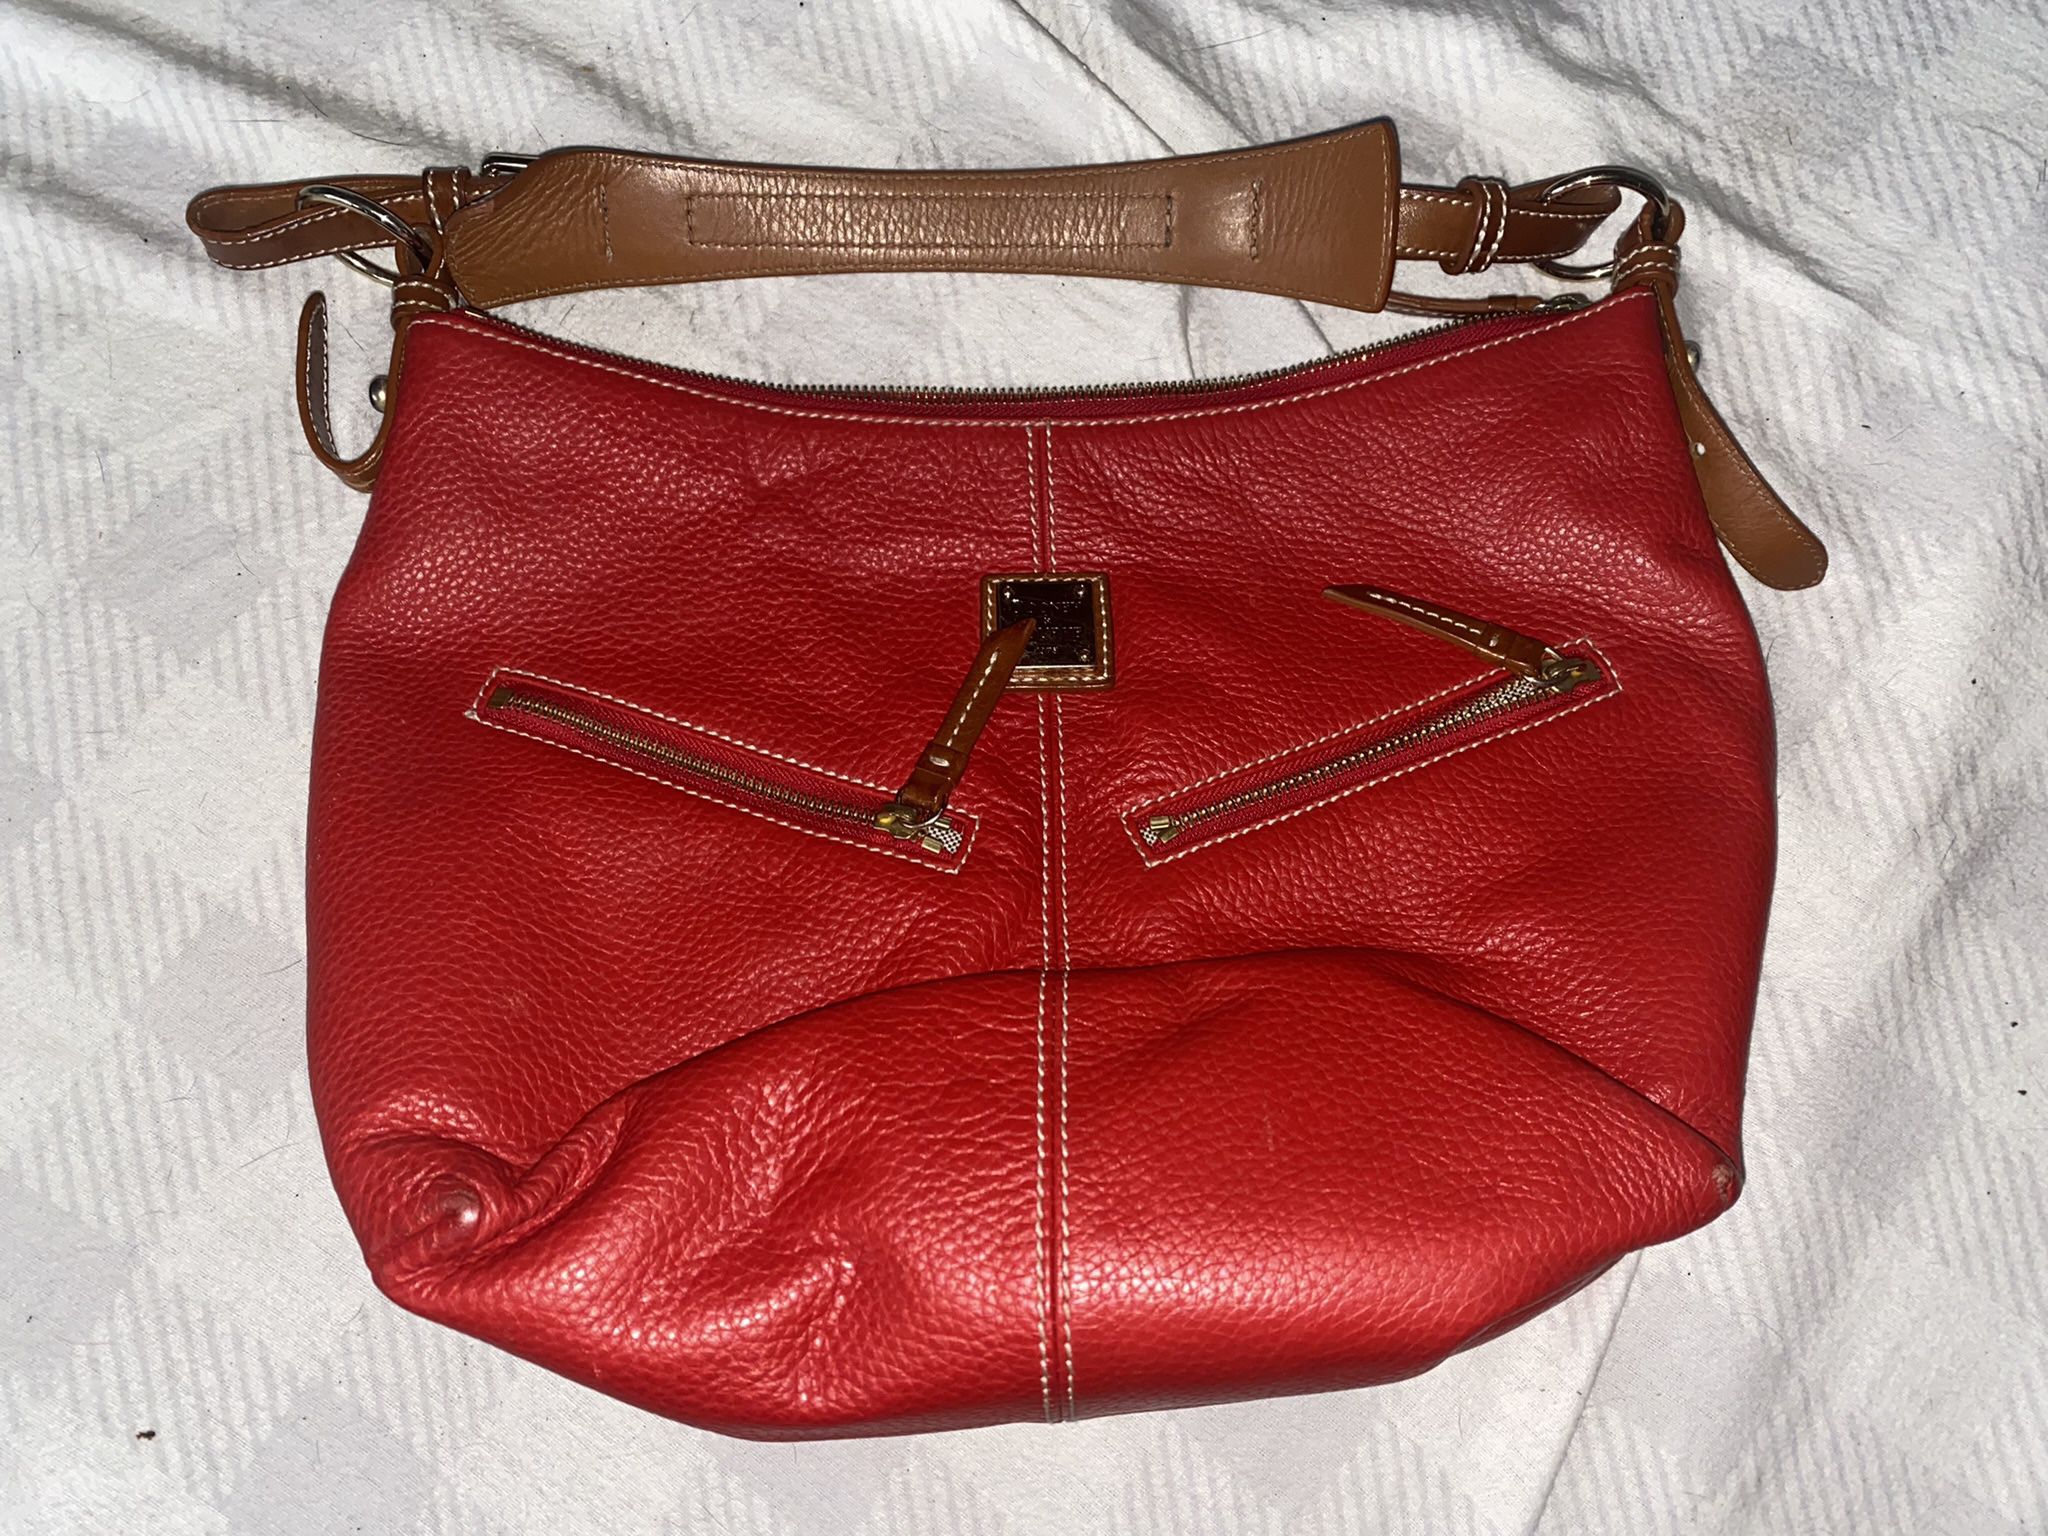 Dooney & Bourke Red Pebbled Leather Purse